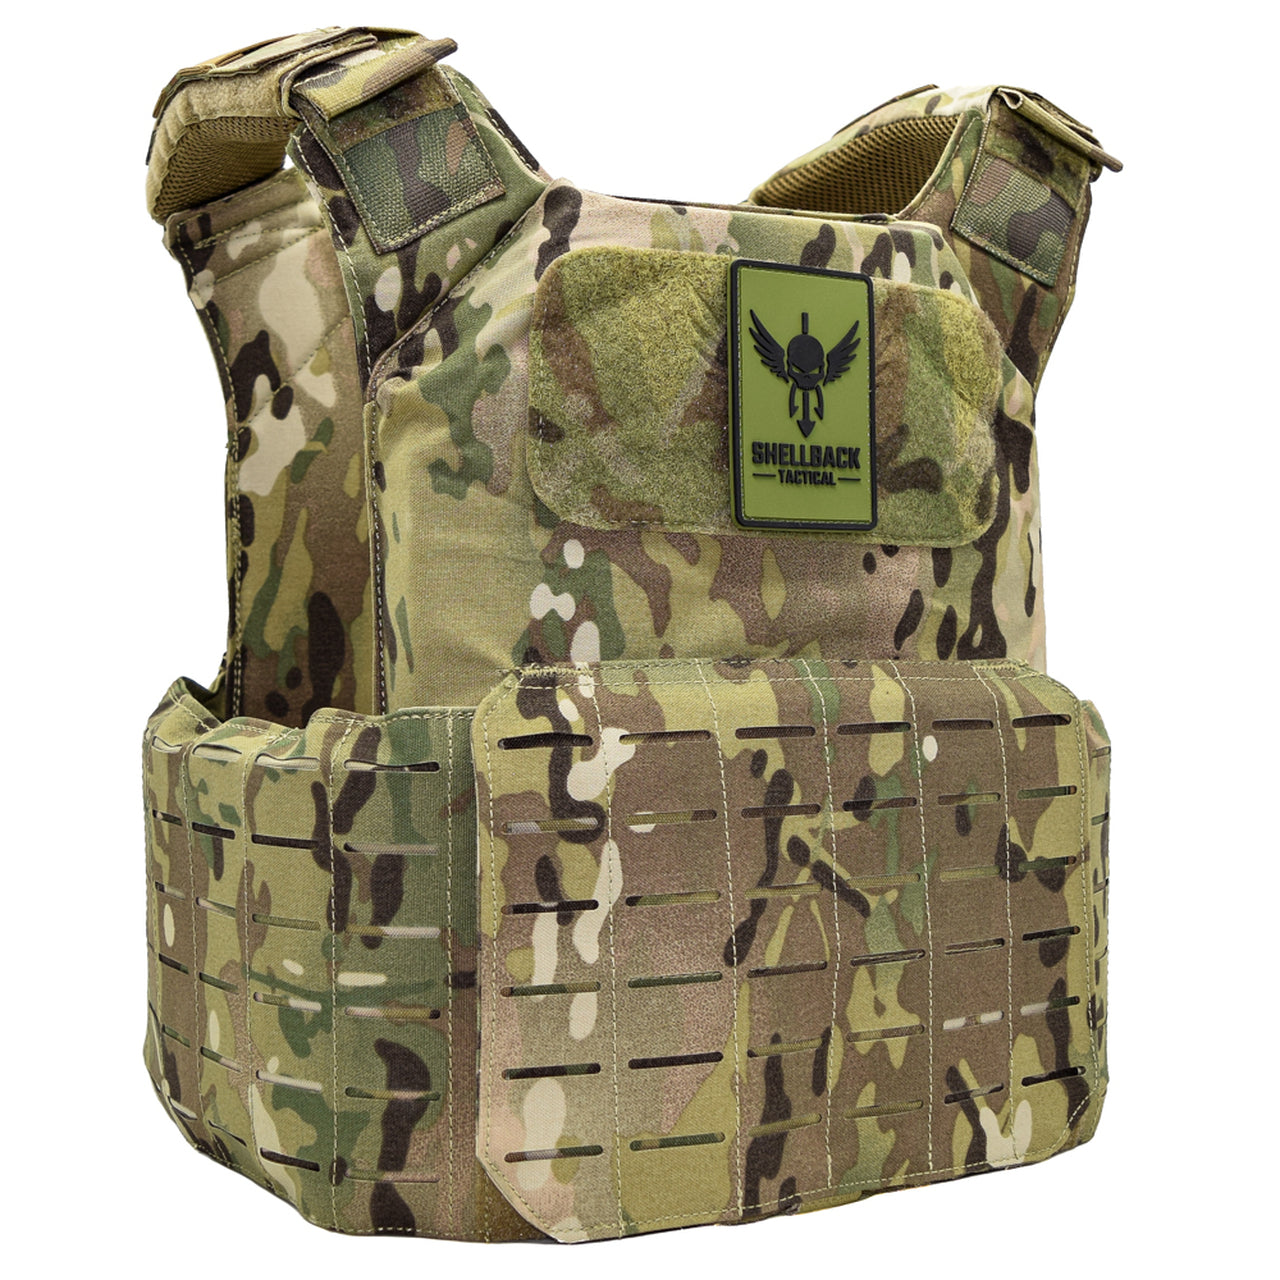 A Shellback Tactical Shield 2.0 Plate Carrier with a camouflage design.